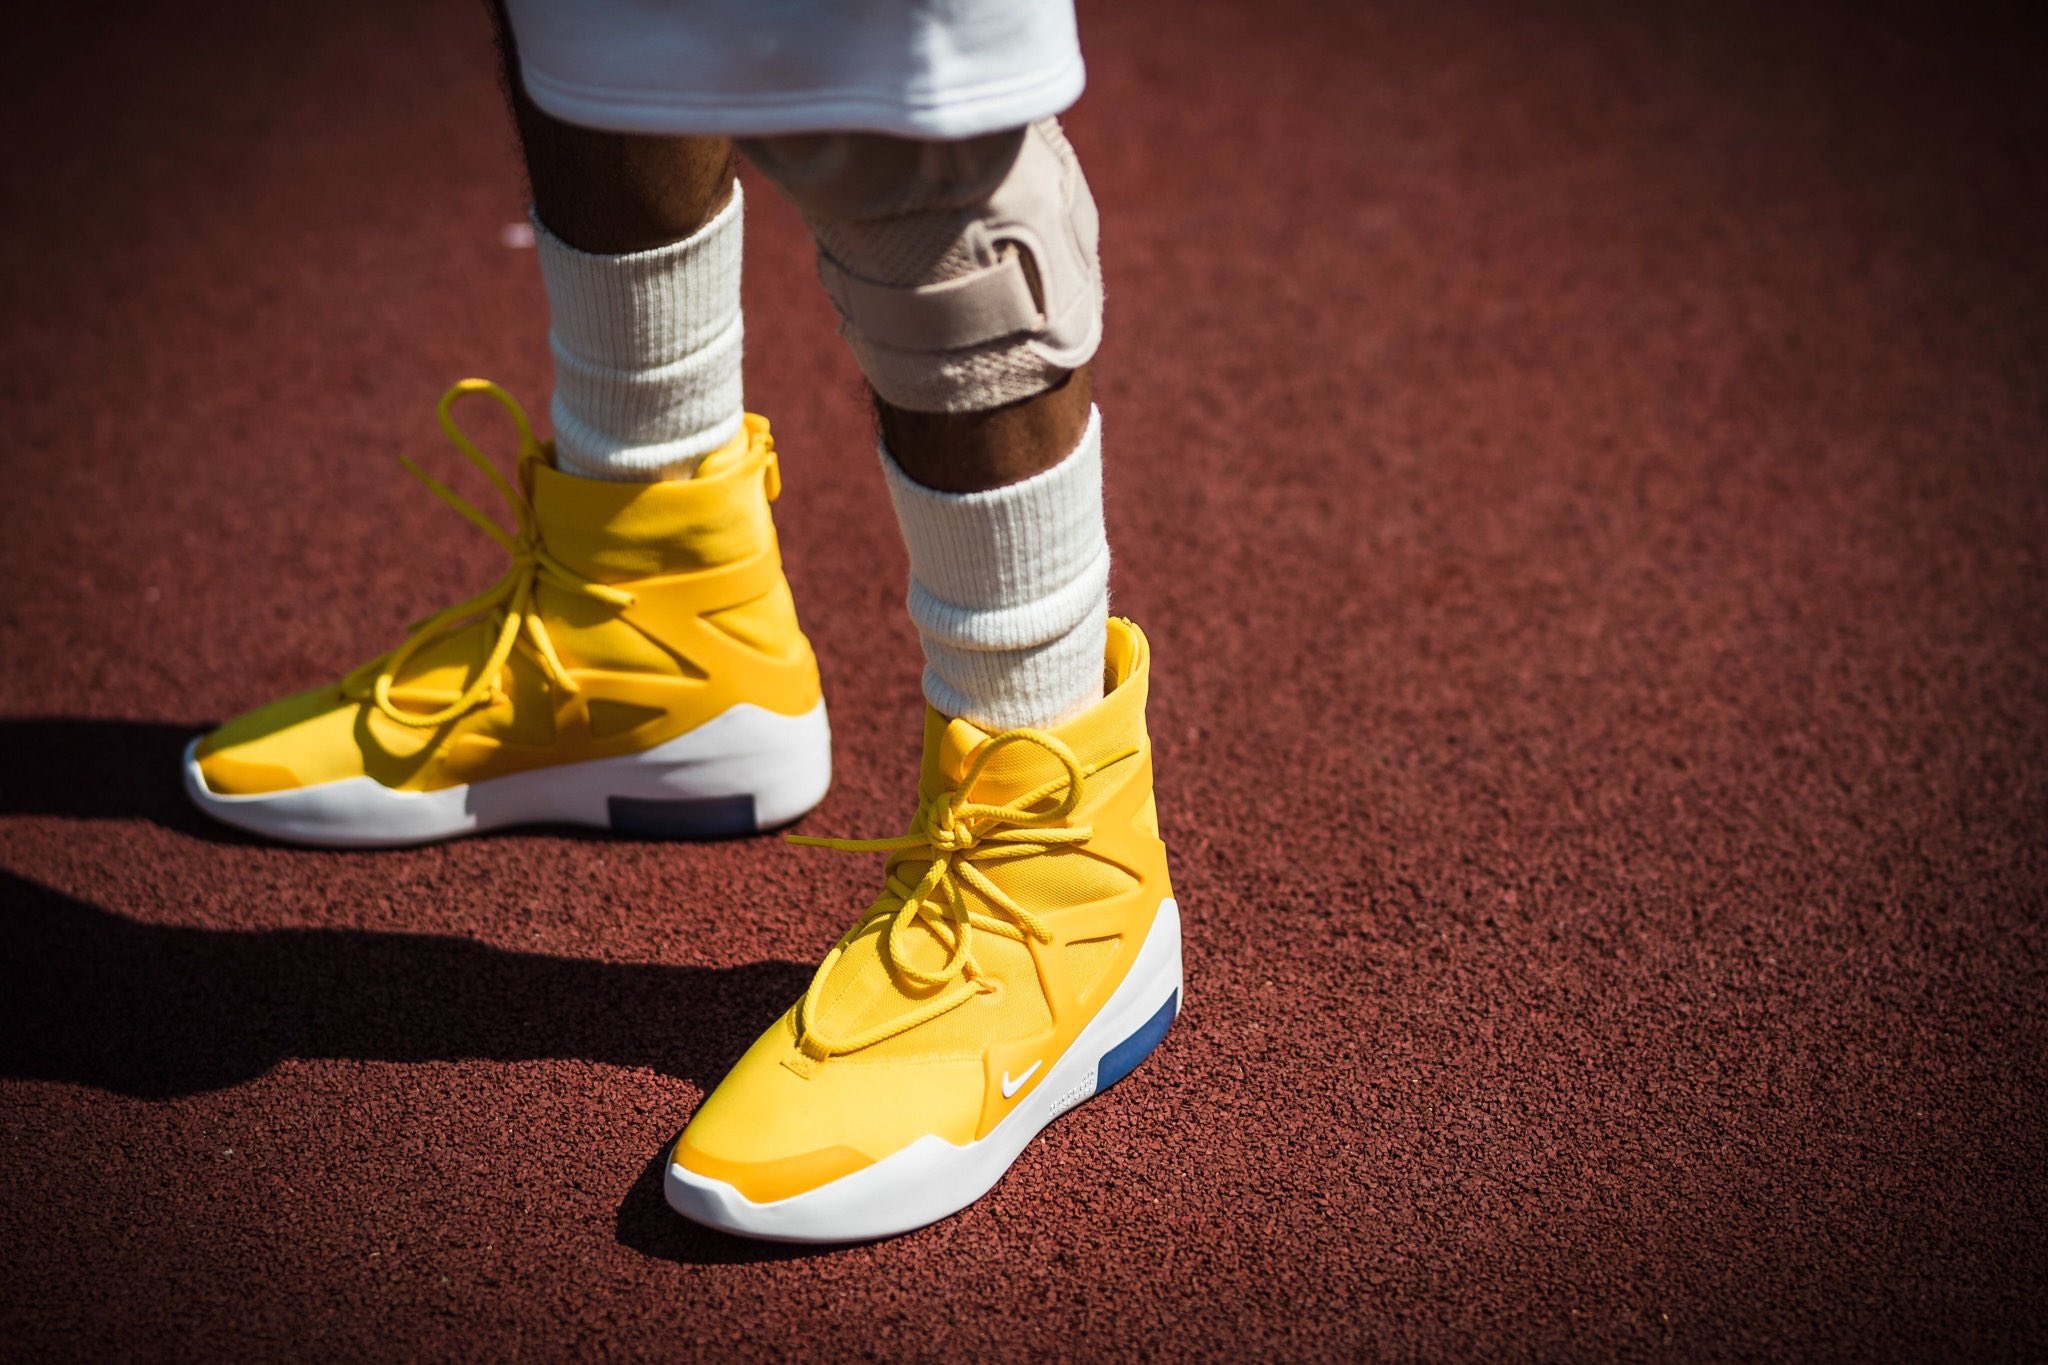 Cámara sitio Precursor Complex Sneakers on Twitter: ".@JERRYlorenzo rocking the yellow Nike Air  Fear of God 1s he wants you to call anything but “Amarillo” at the MLB  Celebrity Softball Game. 📸: @Cut4 https://t.co/DvO4UH9EmC" /